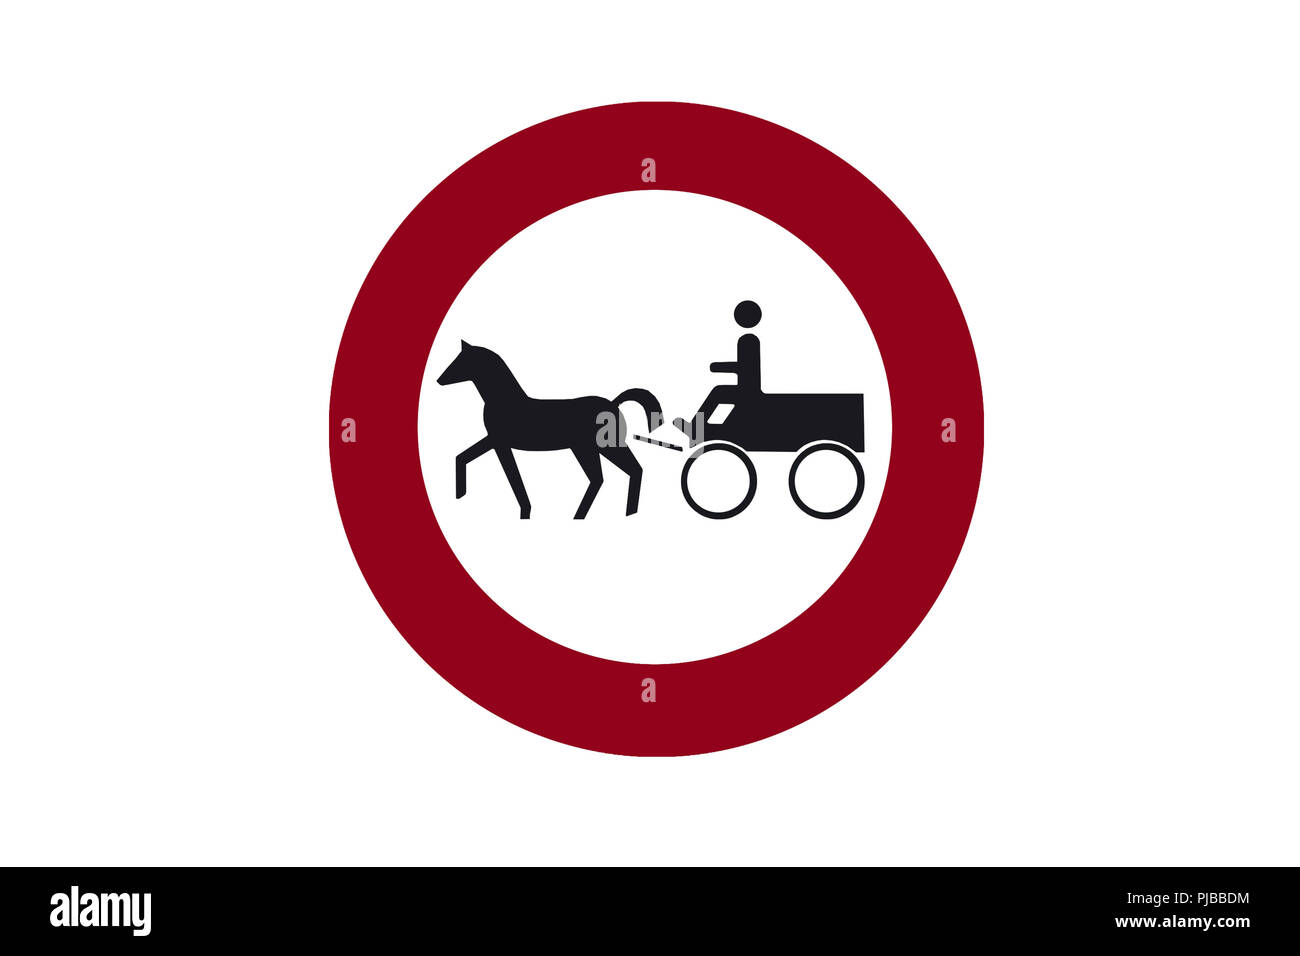 illustration sign allowing the movement of carts with horses. Stock Photo